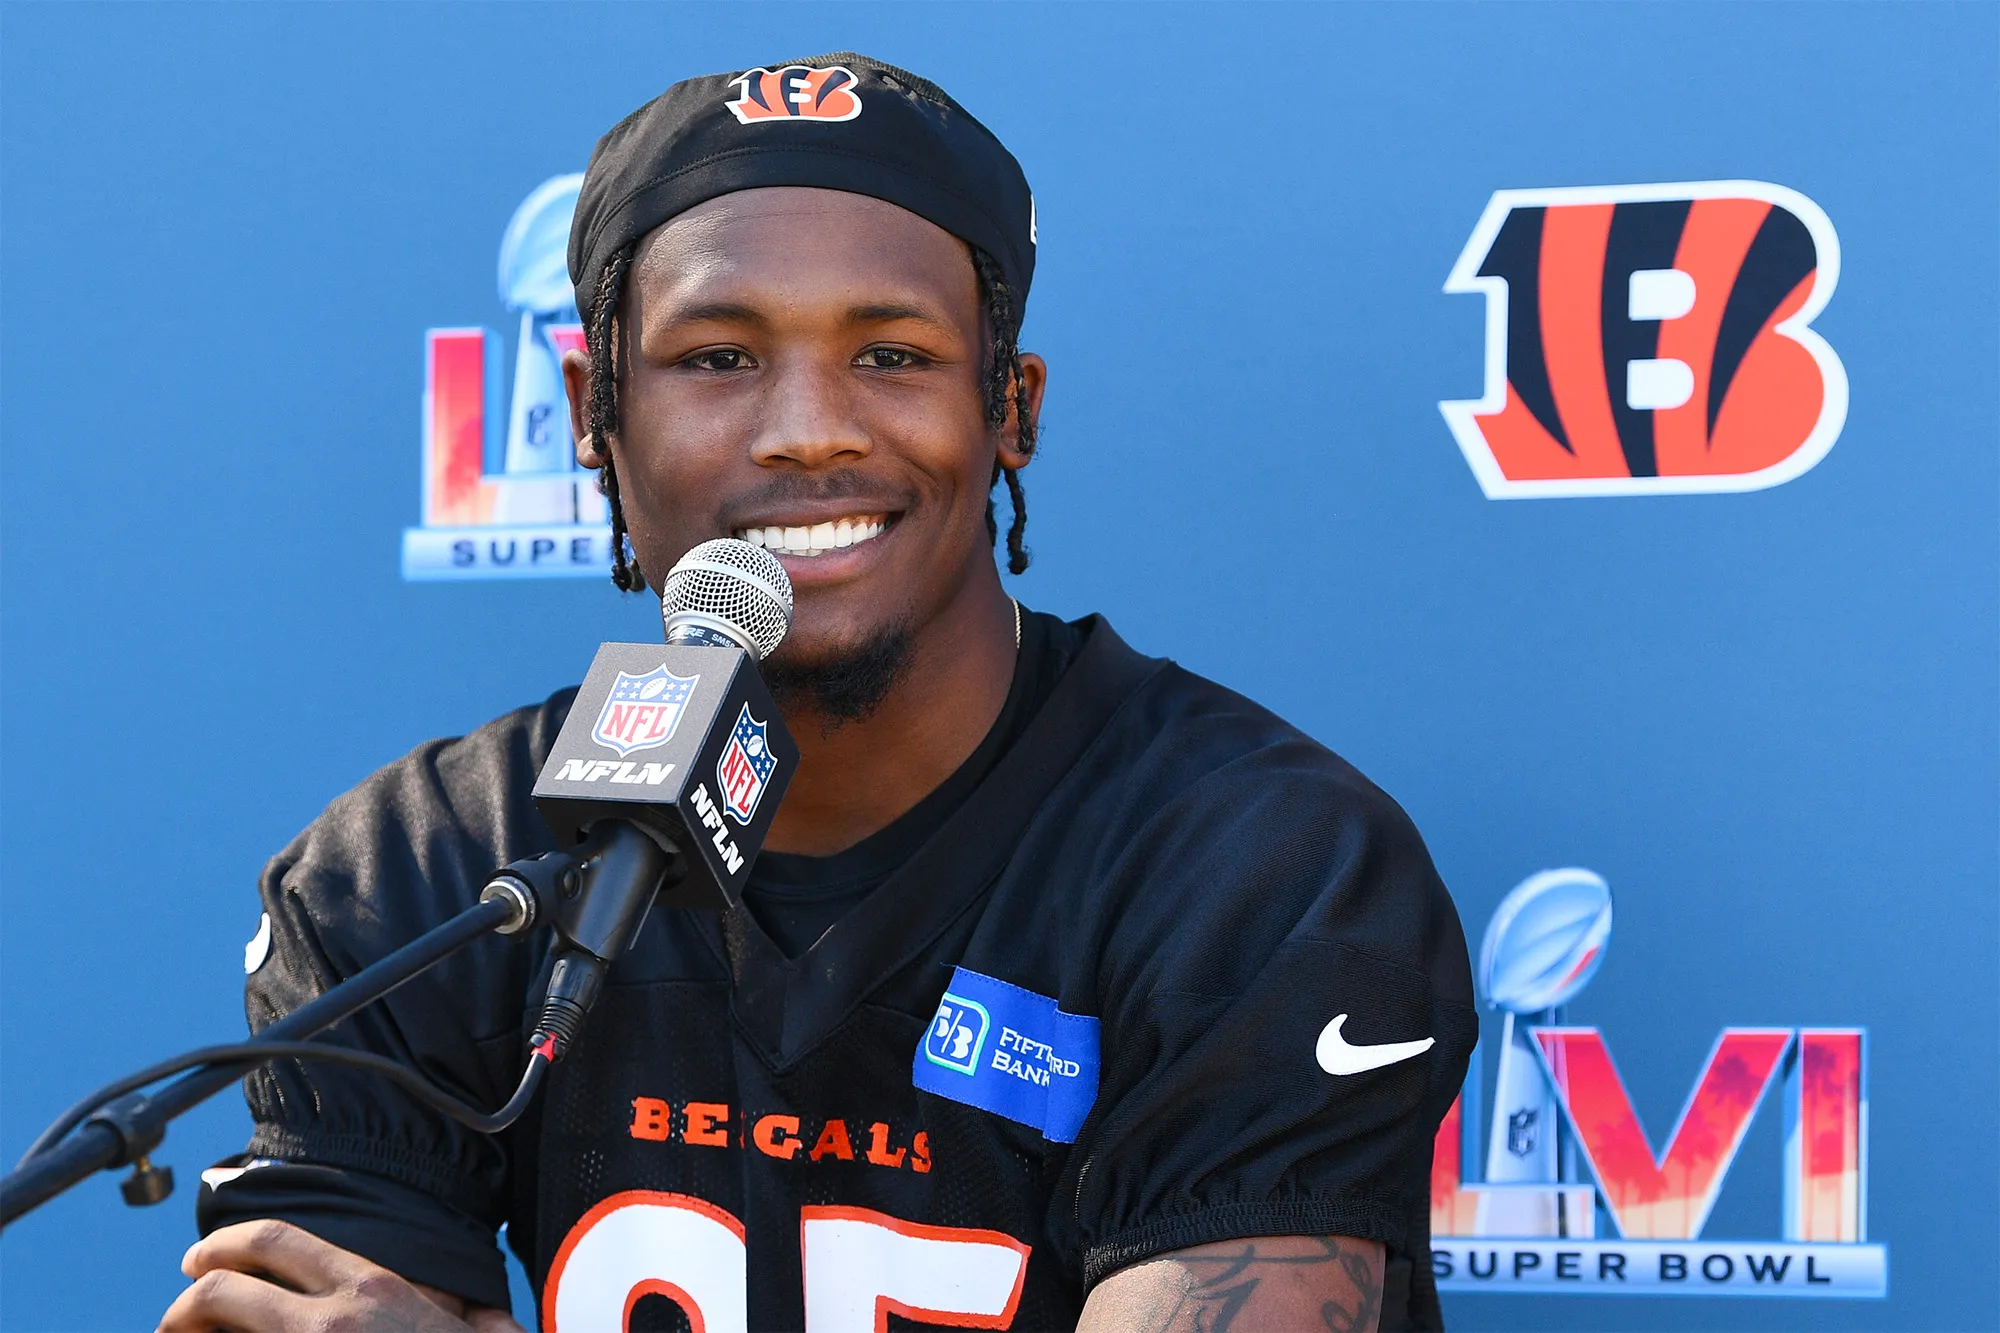 Tee Higgins Holds Out for Trade or Extension from Bengals